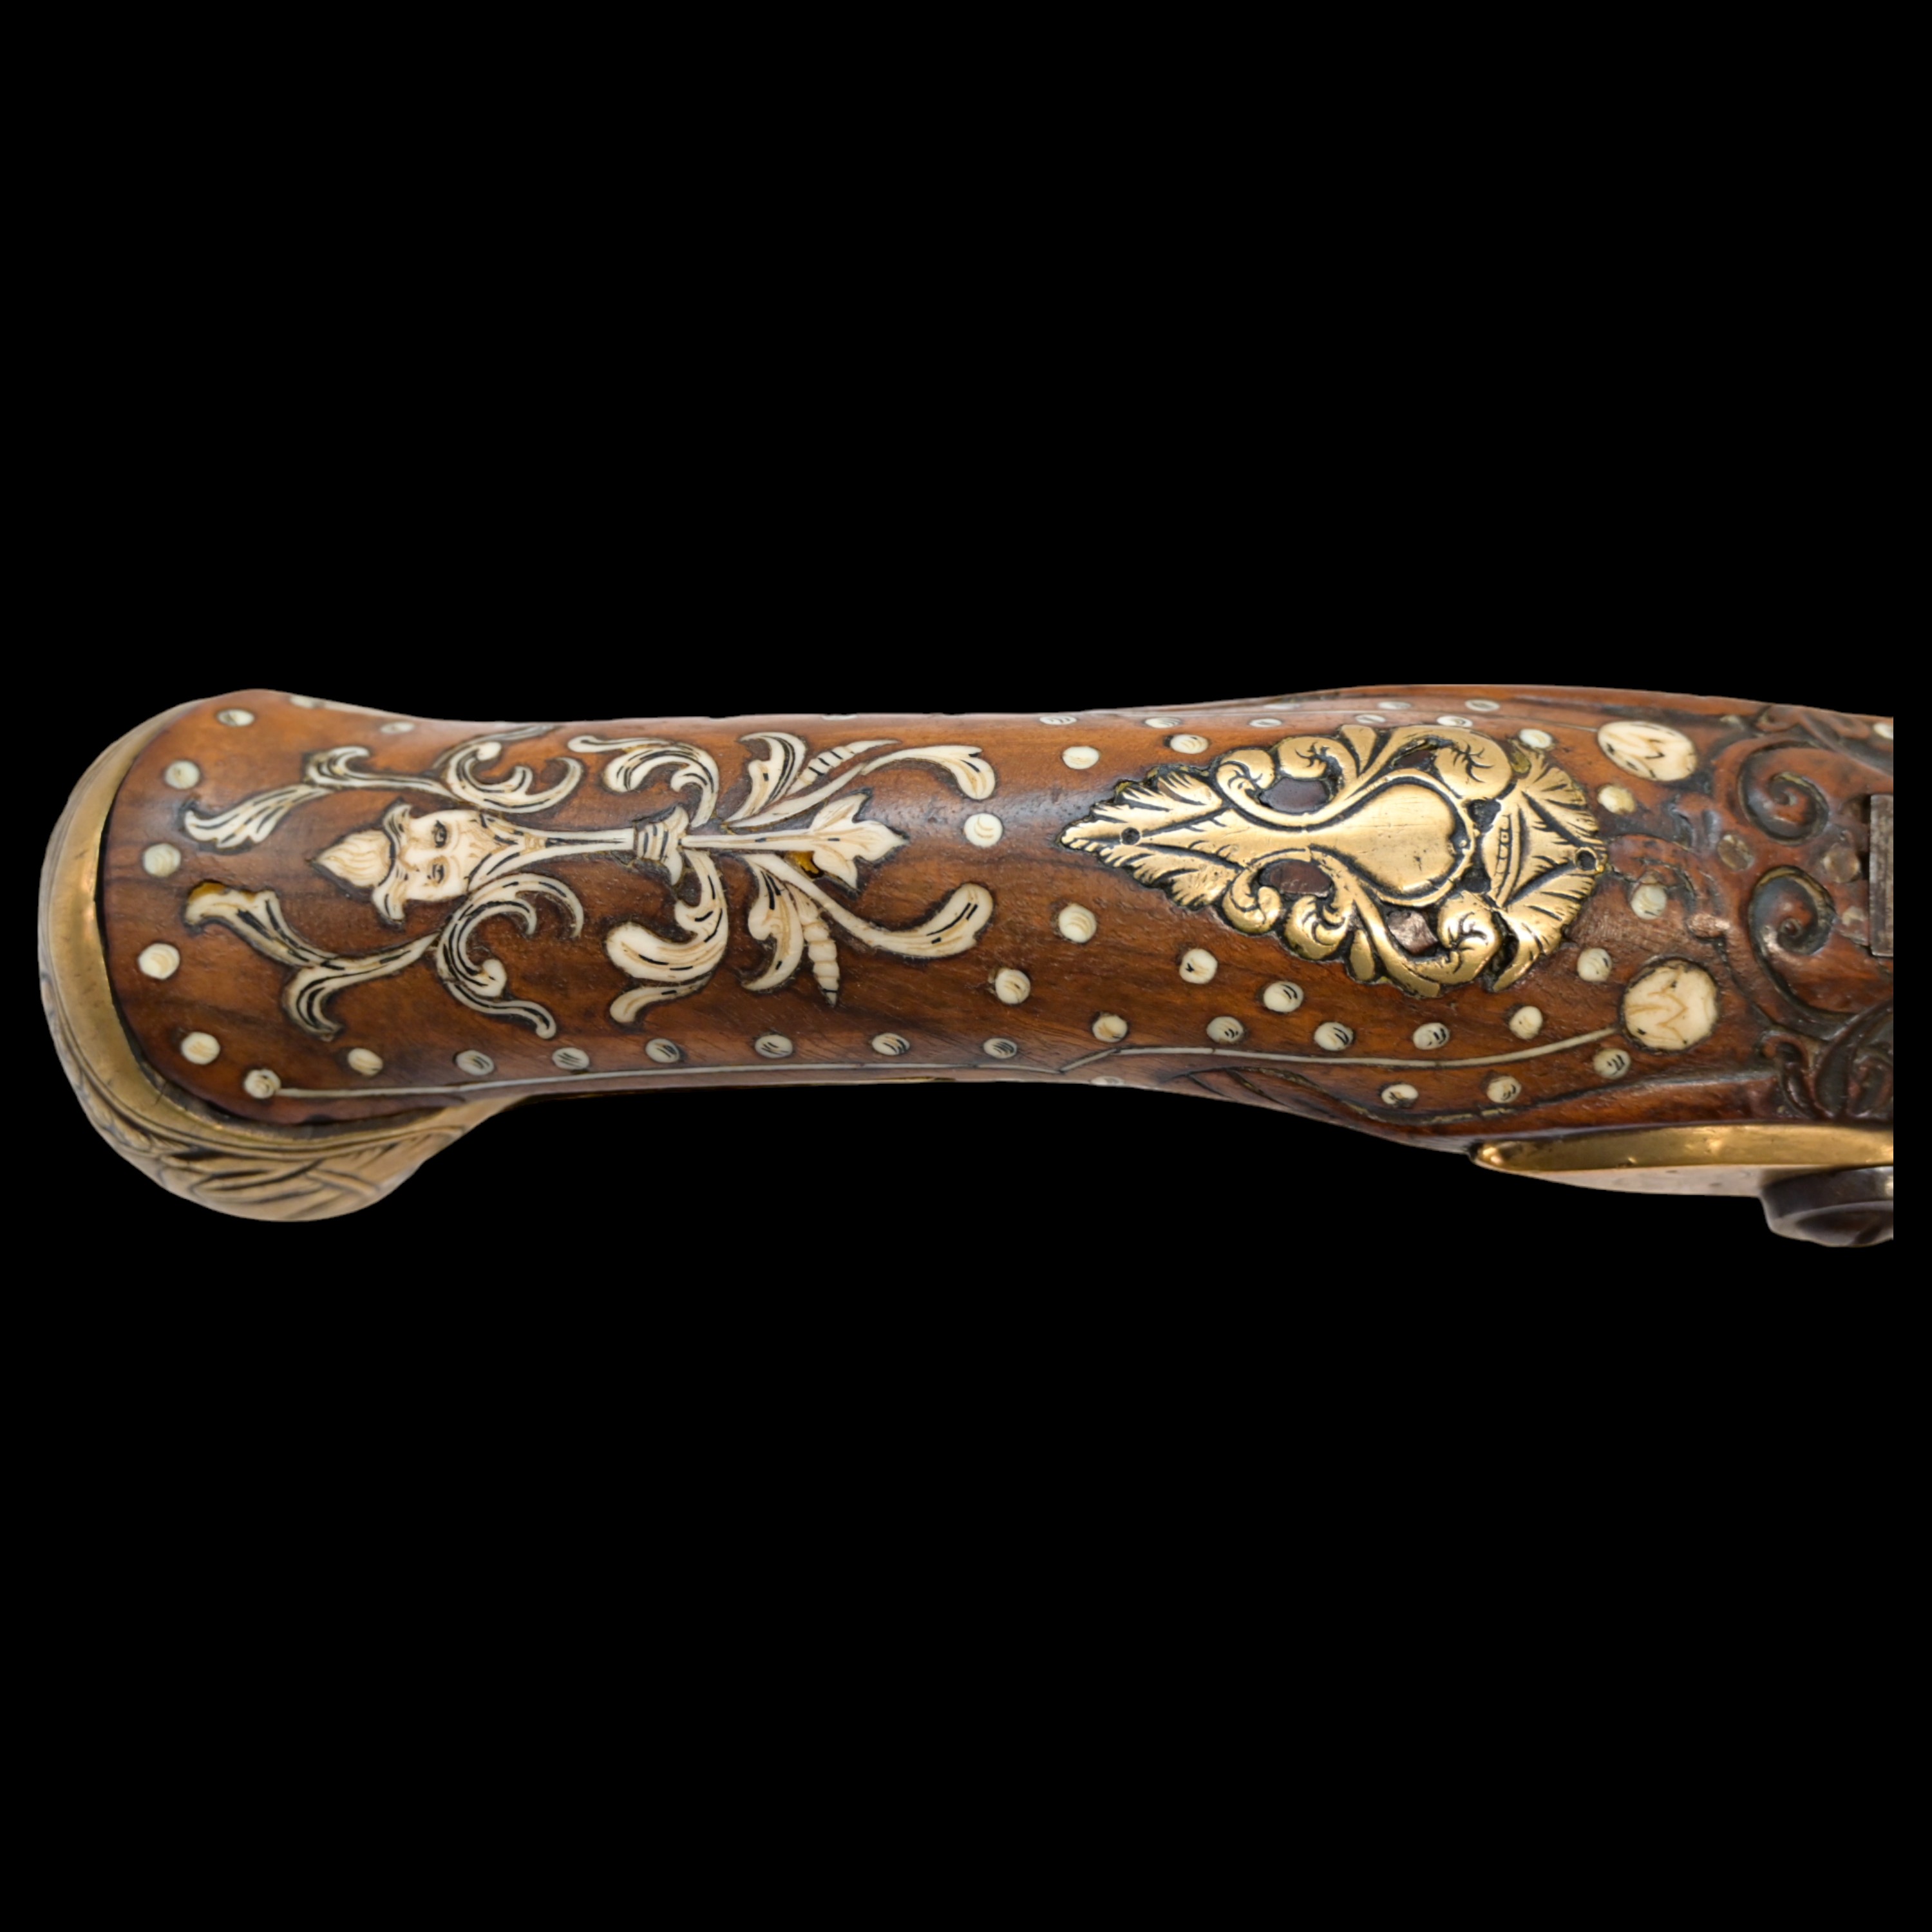 Rare, Richly decorated with inlay, flintlock pistol, Germany, last quarter of the 17th century. - Image 4 of 12